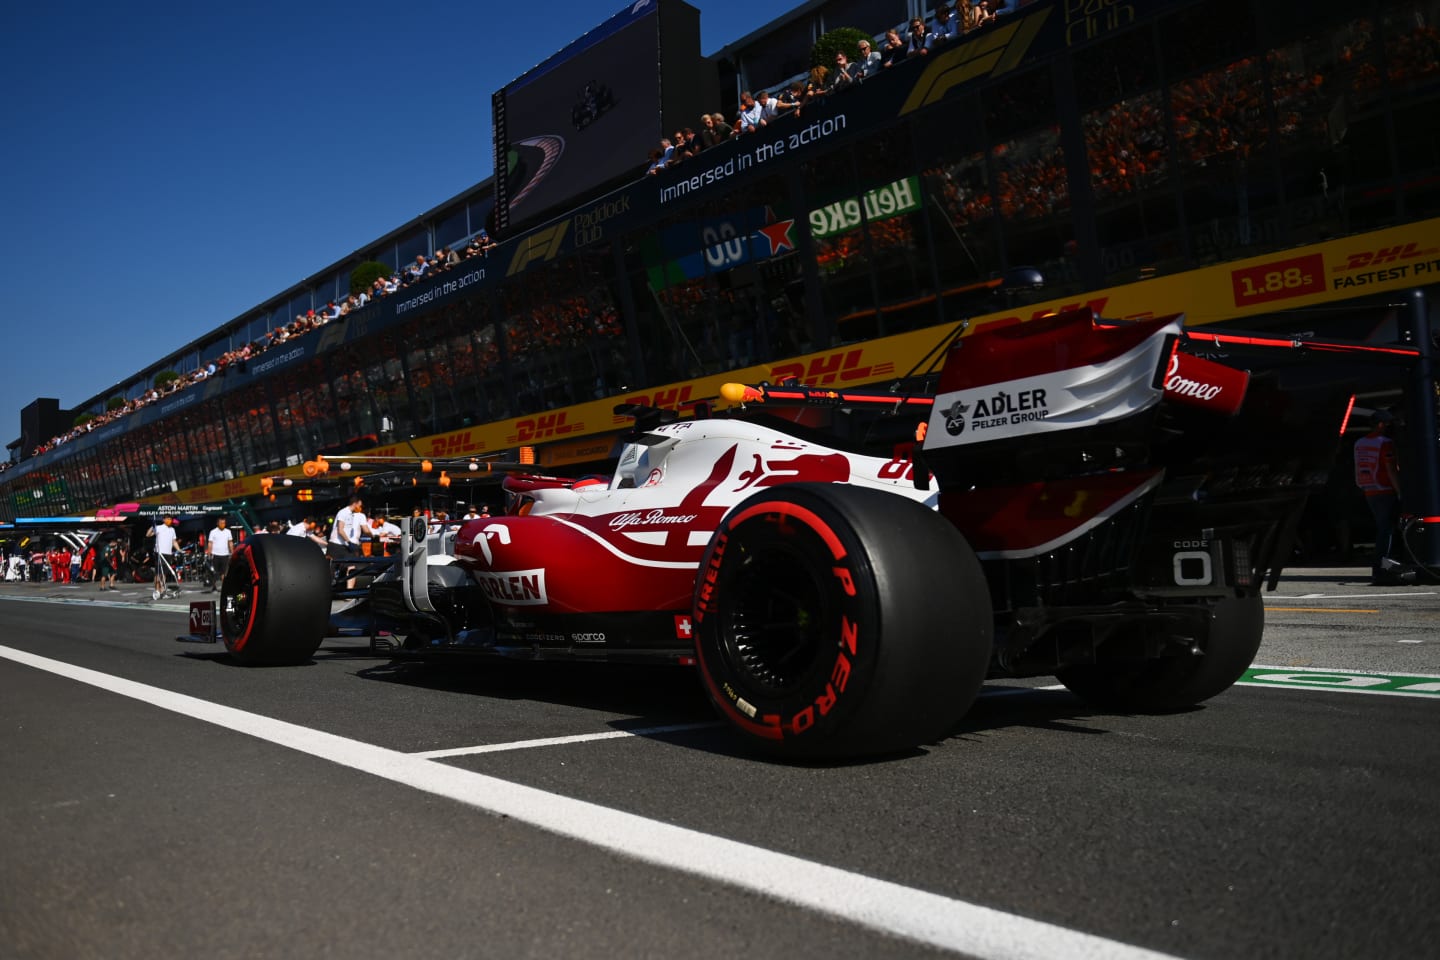 ZANDVOORT, NETHERLANDS - SEPTEMBER 04: Robert Kubica of Poland driving the (88) Alfa Romeo Racing C41 Ferrari in the Pitlane during qualifying ahead of the F1 Grand Prix of The Netherlands at Circuit Zandvoort on September 04, 2021 in Zandvoort, Netherlands. (Photo by Dan Mullan/Getty Images)